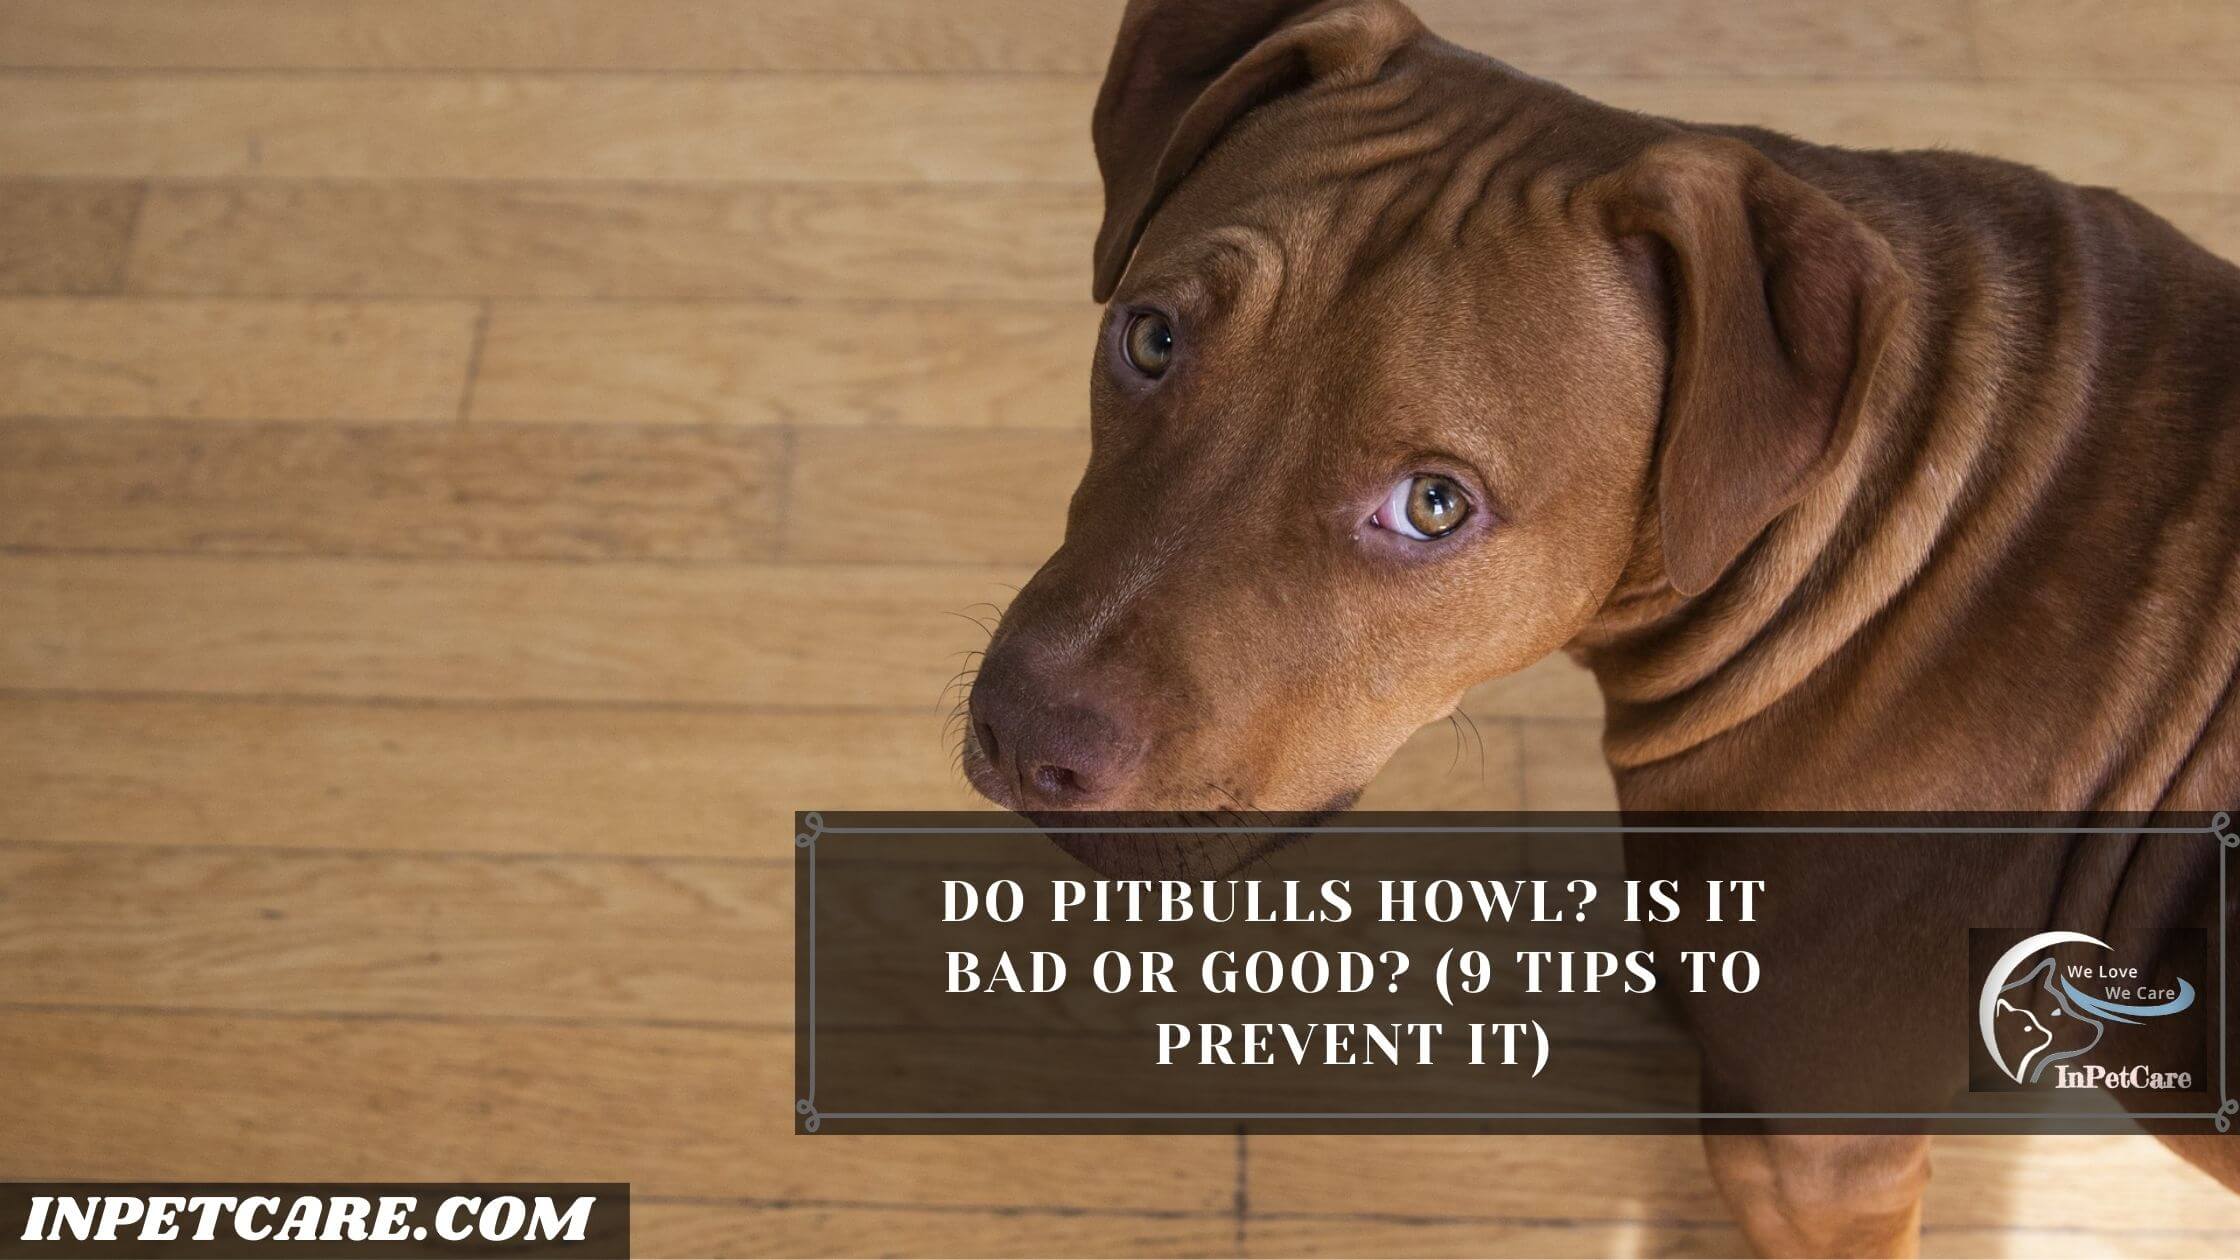 Do Pitbulls Howl? Is It Bad or Good? (9 Tips To Prevent It)